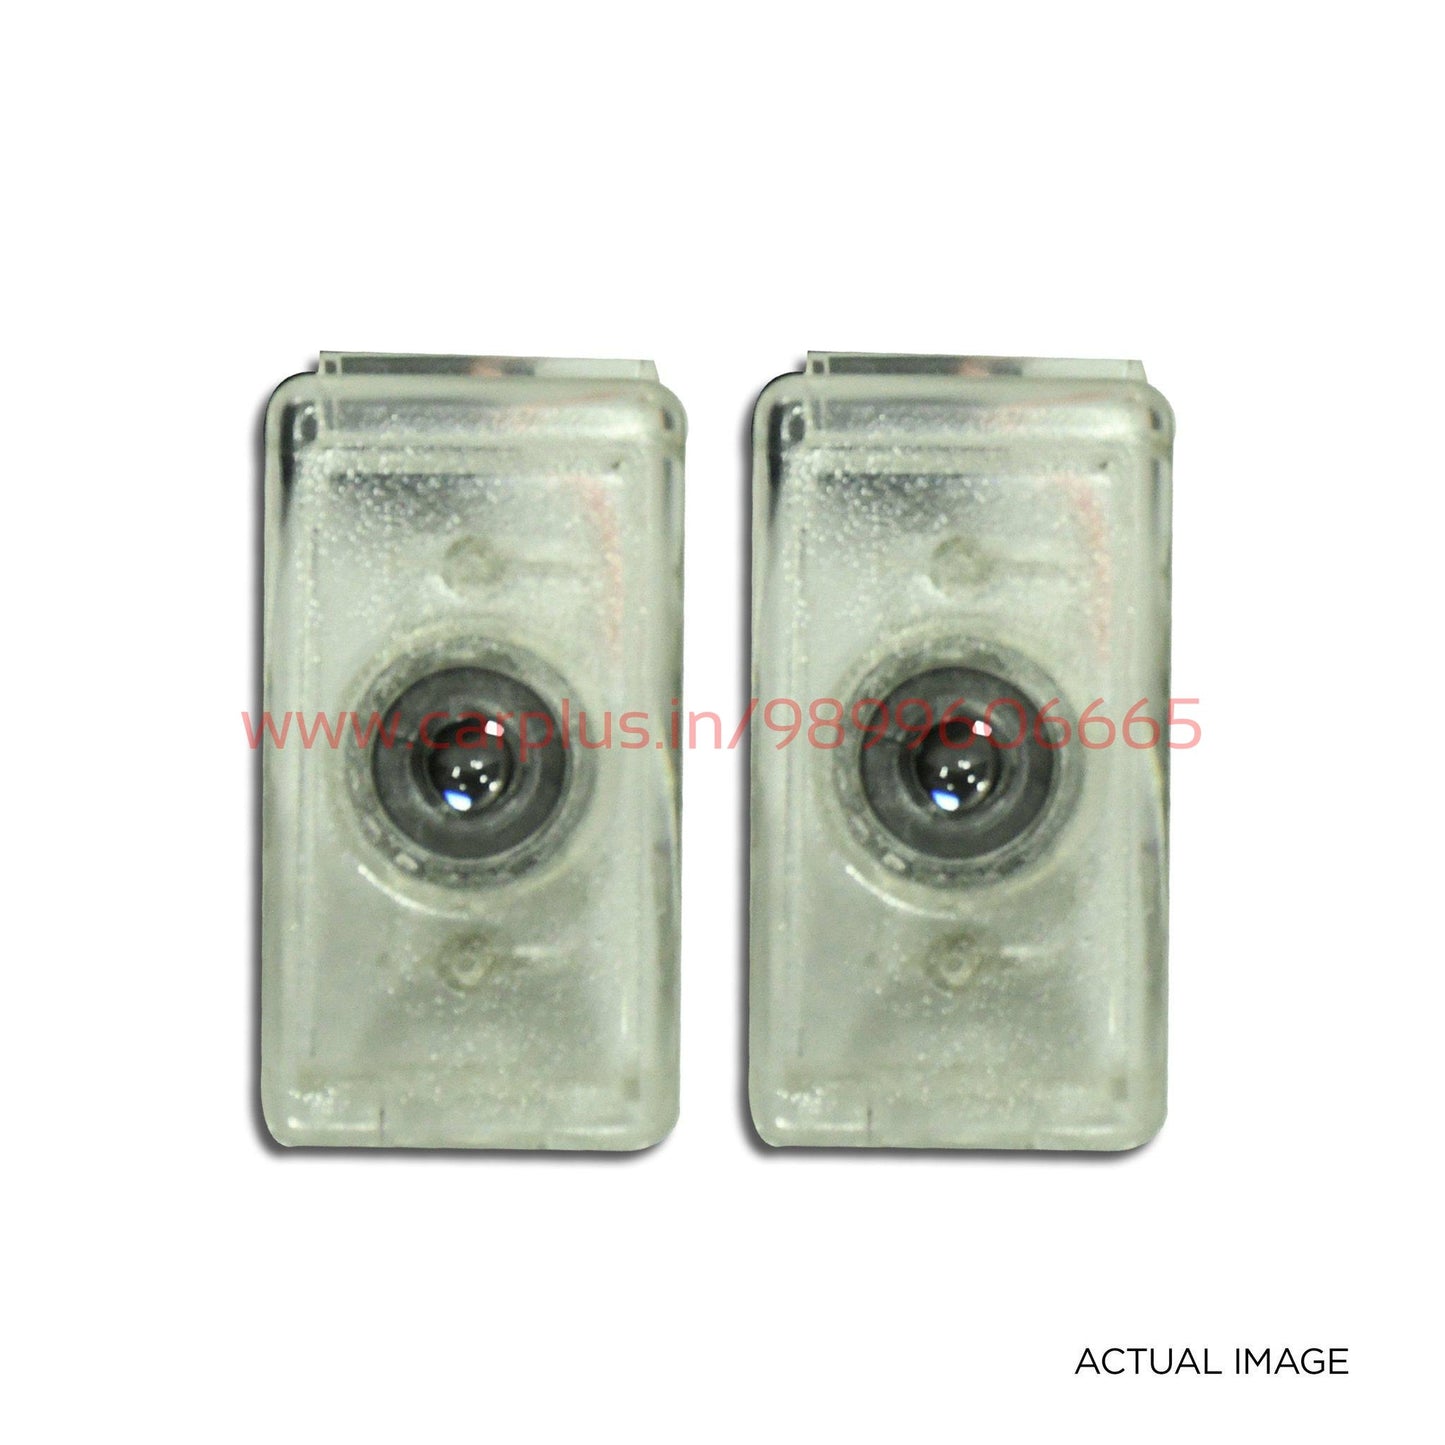 
                  
                    KMH Premium High Quality Ghost Shadow Light for Mercedes Benz (Set of 2pcs) KMH-GHOST SHADOW LIGHT GHOST SHADOW LIGHT.
                  
                